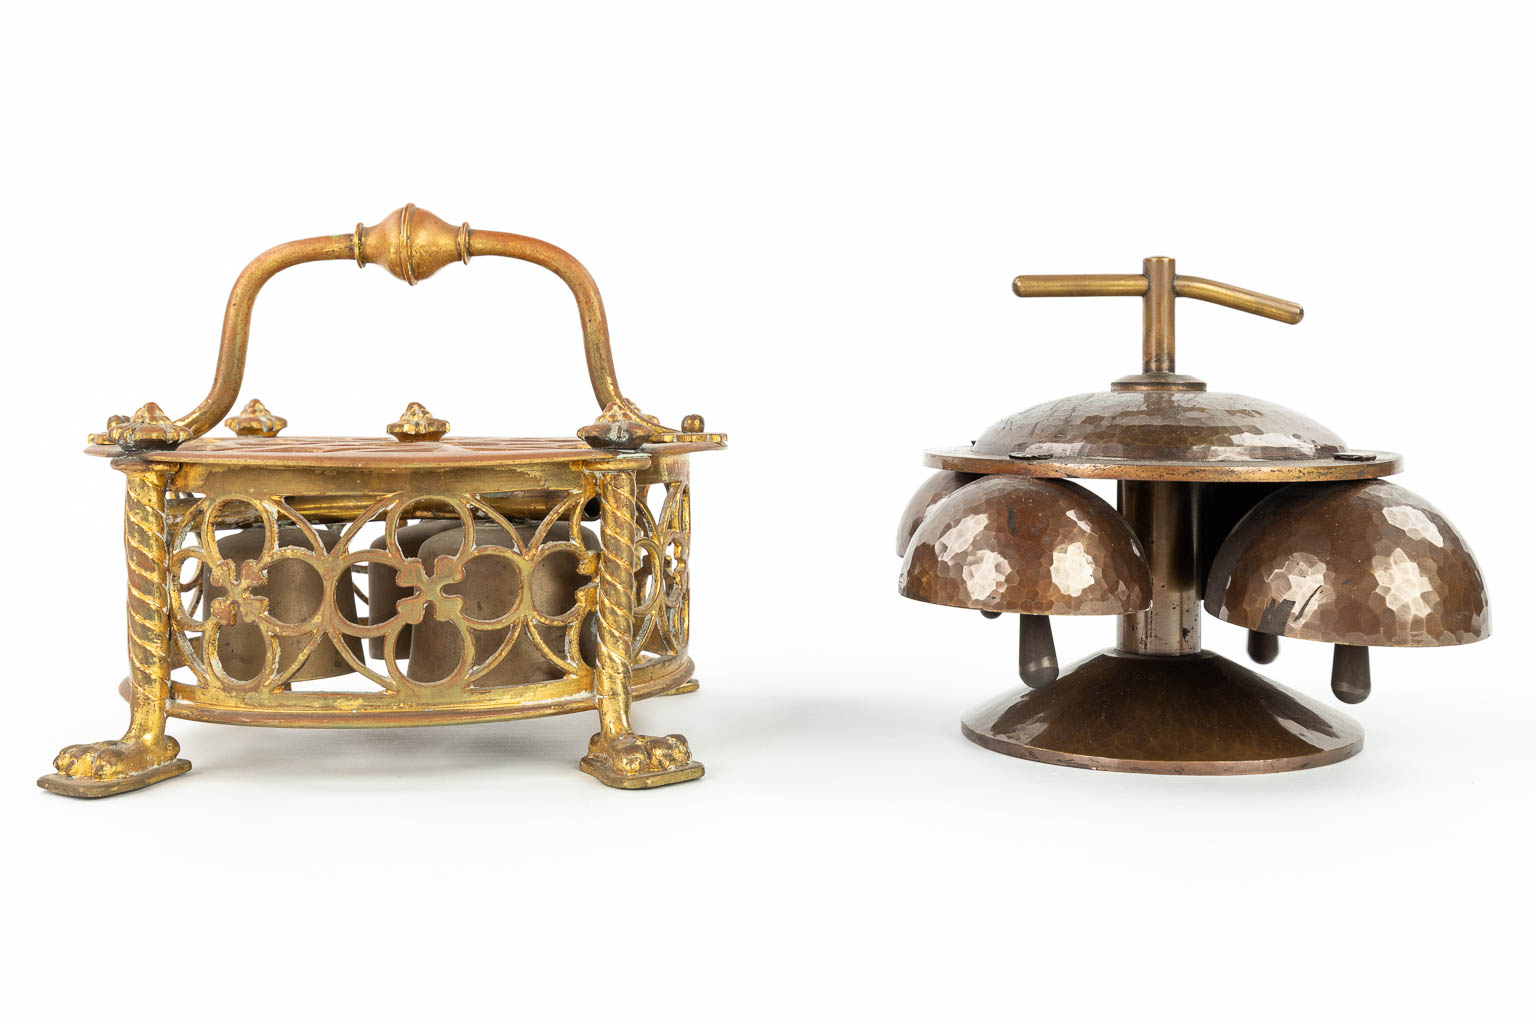 An assembled collection of 5 Altar Bells, made of various metal types. (H:15cm) - Image 7 of 8